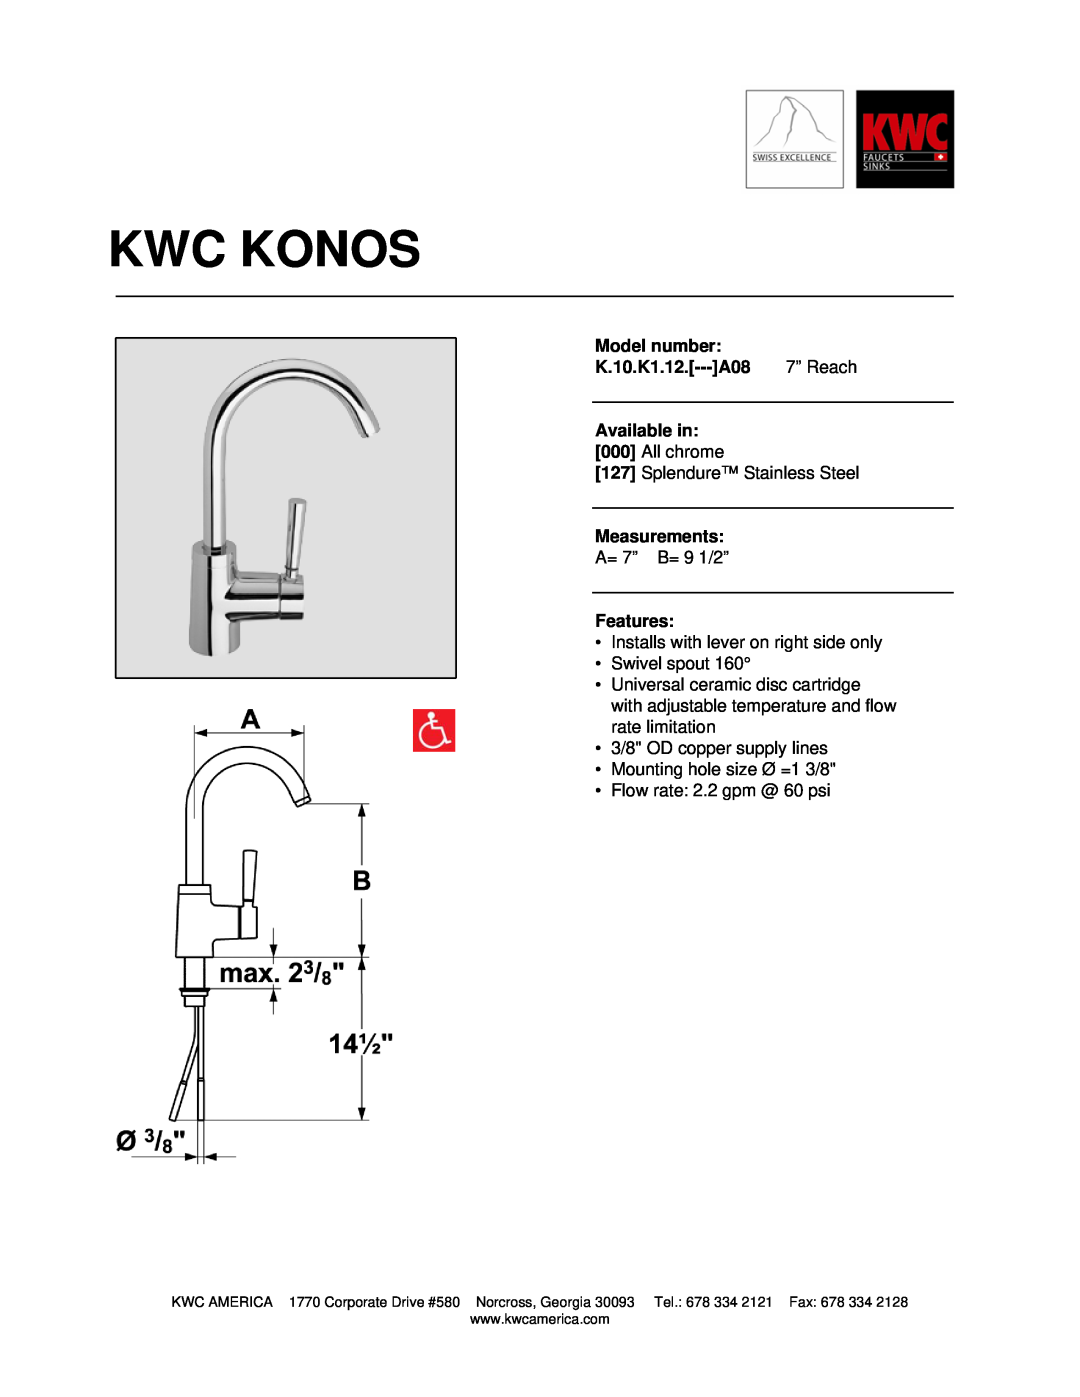 KWC manual Kwc Konos, Model number, K.10.K1.12.---A08, 7” Reach, Available in, Measurements, Features 